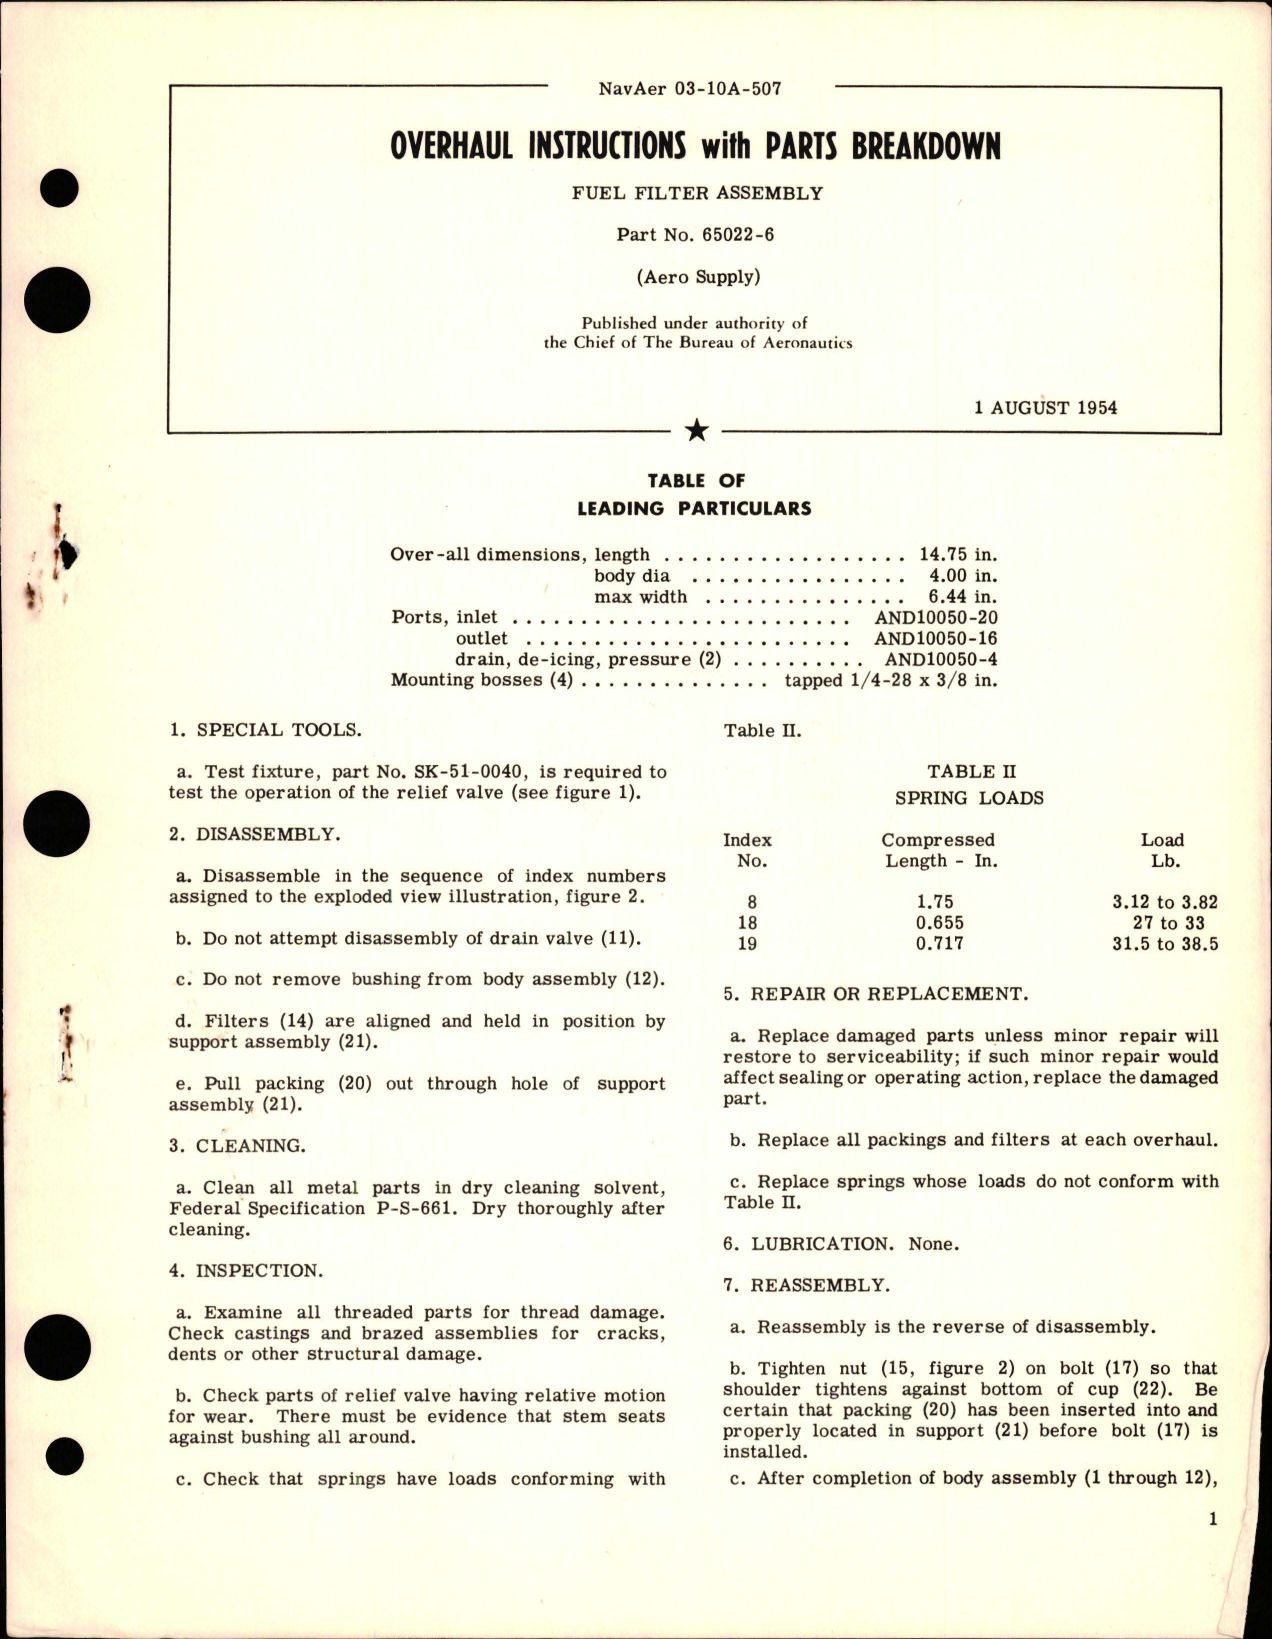 Sample page 1 from AirCorps Library document: Overhaul Instructions with Parts Breakdown for Fuel Filter Assembly - Part 65022-6